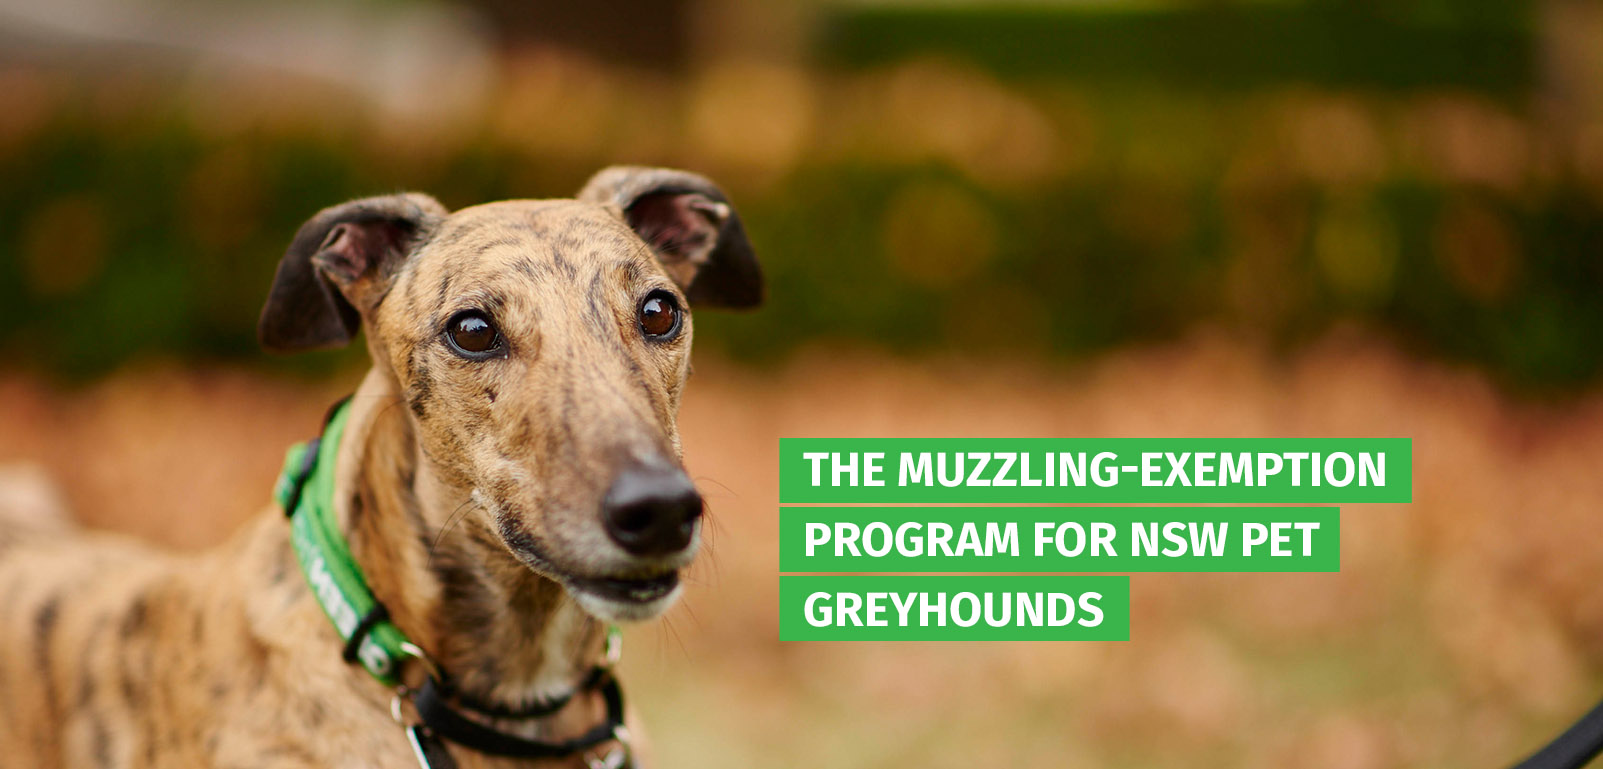 The muzzling-exemption program for NSW pet greyhounds